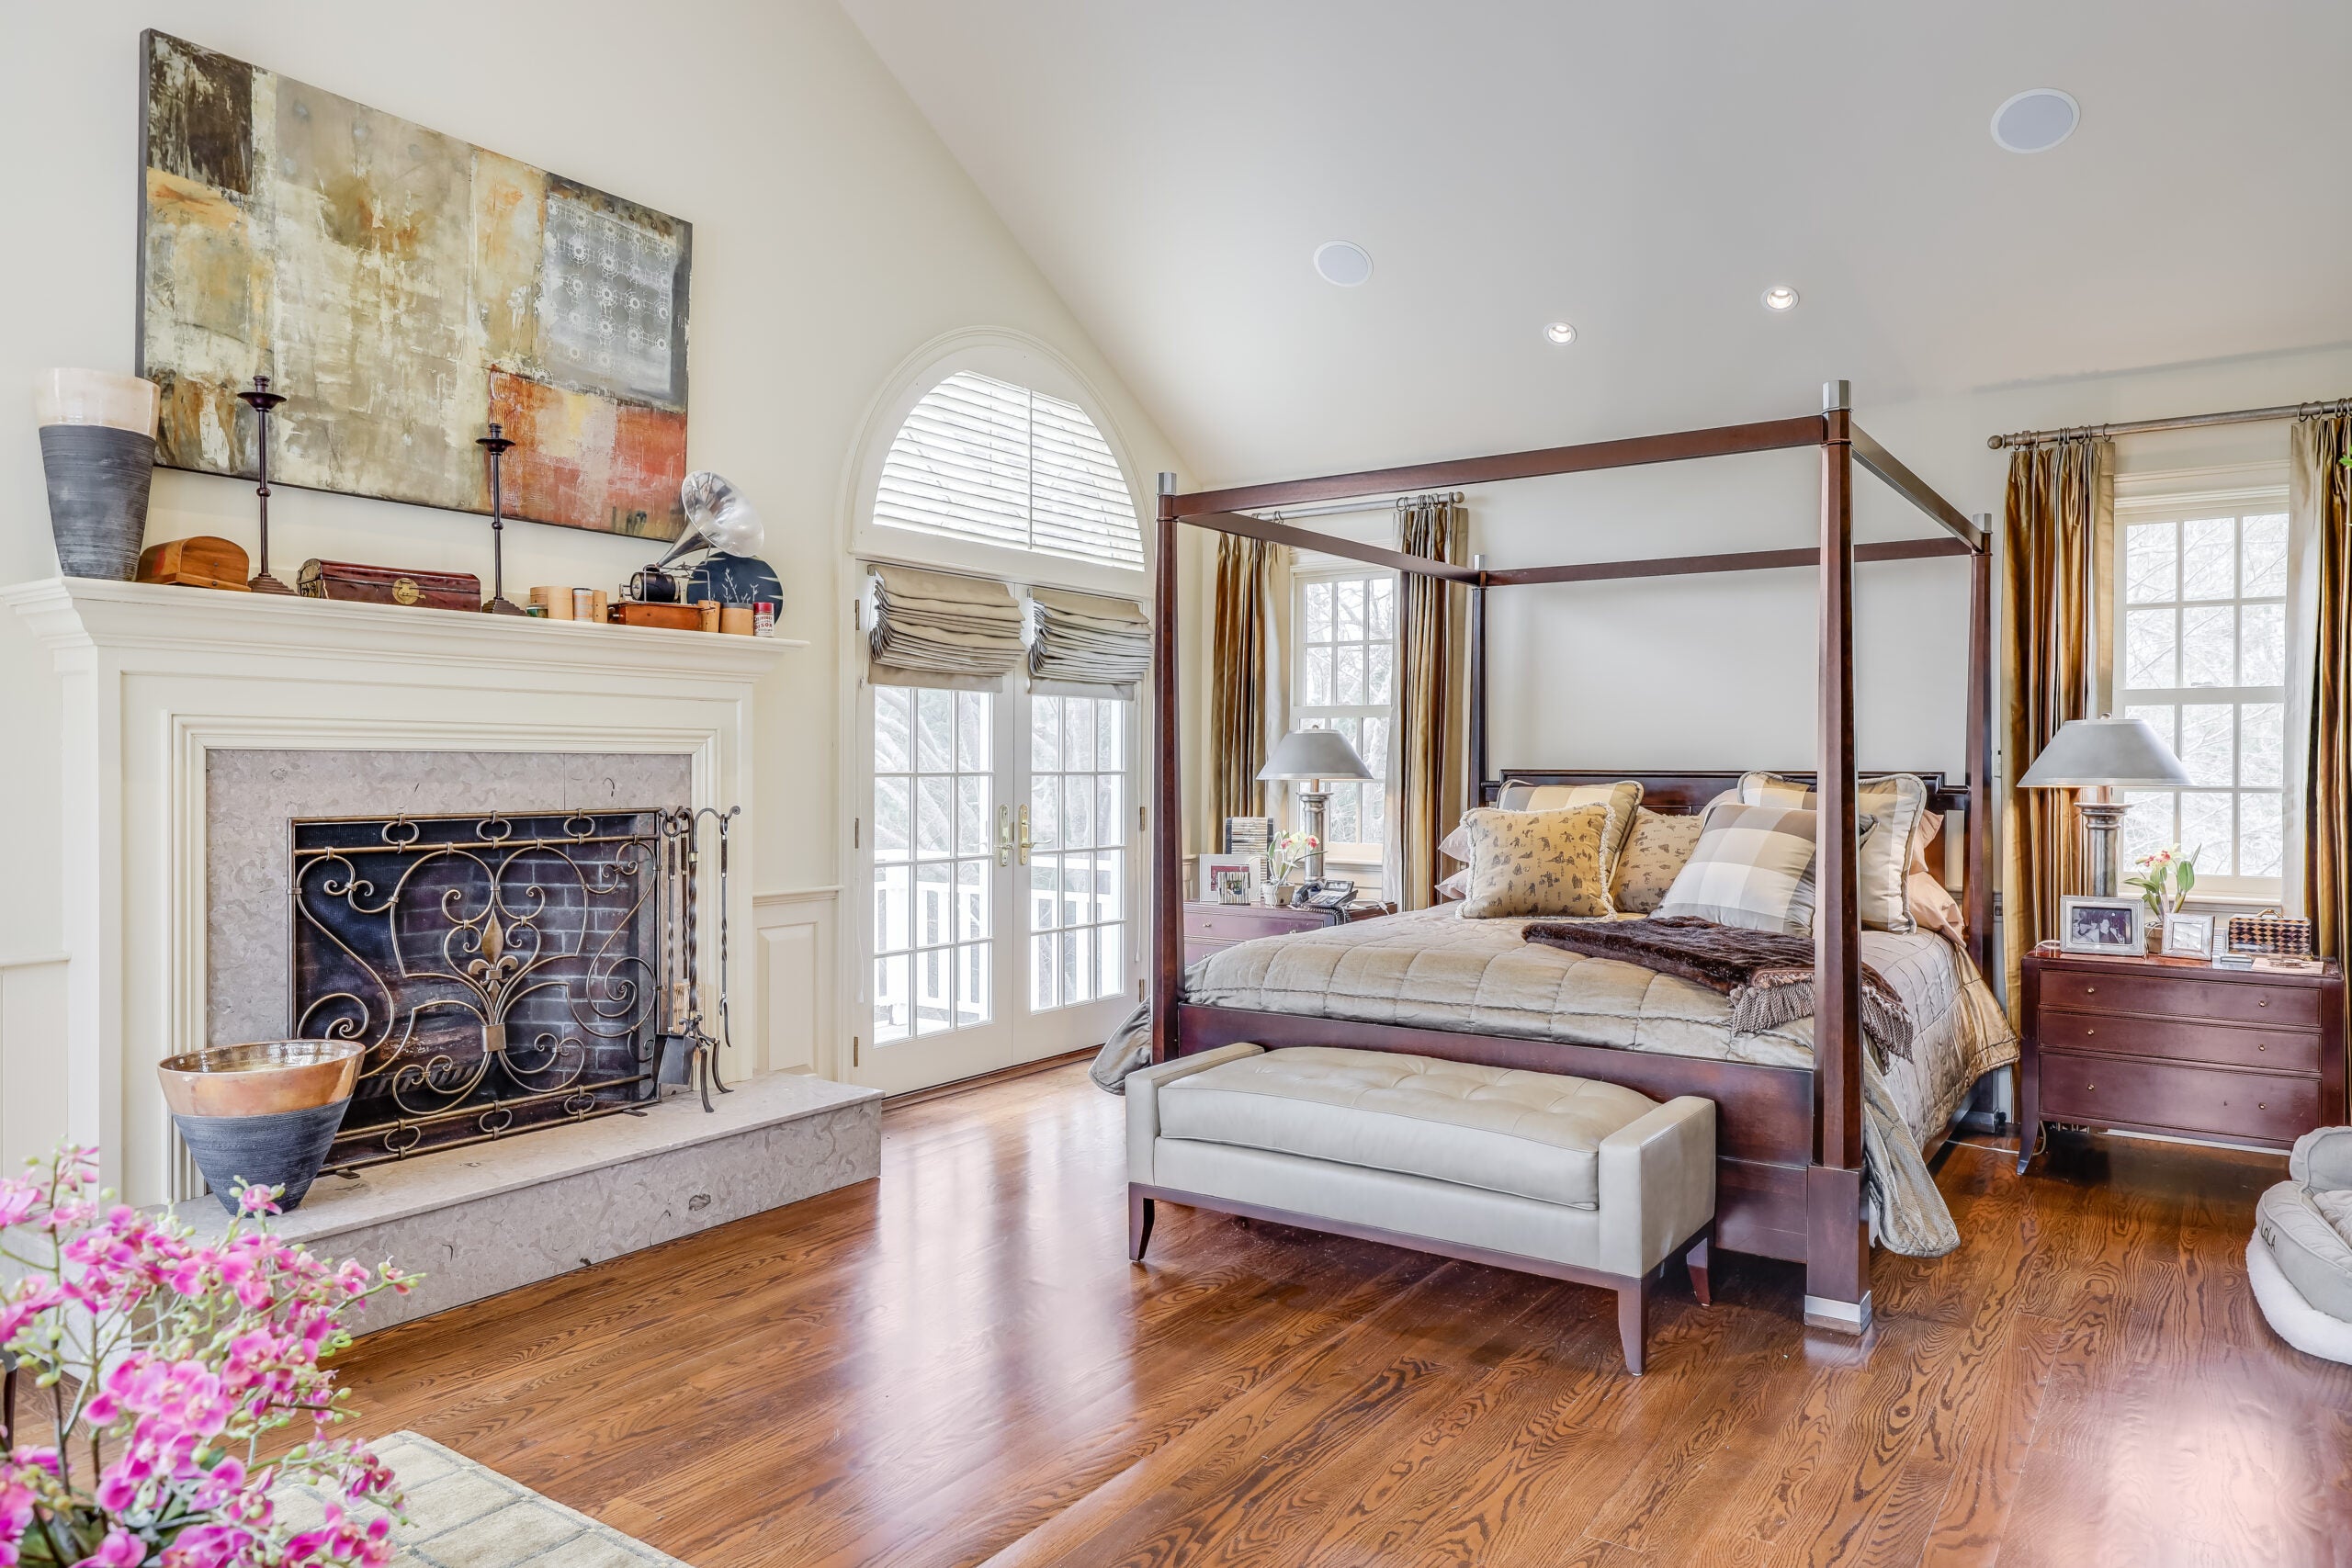 The primary bedroom has cream-colored walls, hardwood floors, and a fireplace.